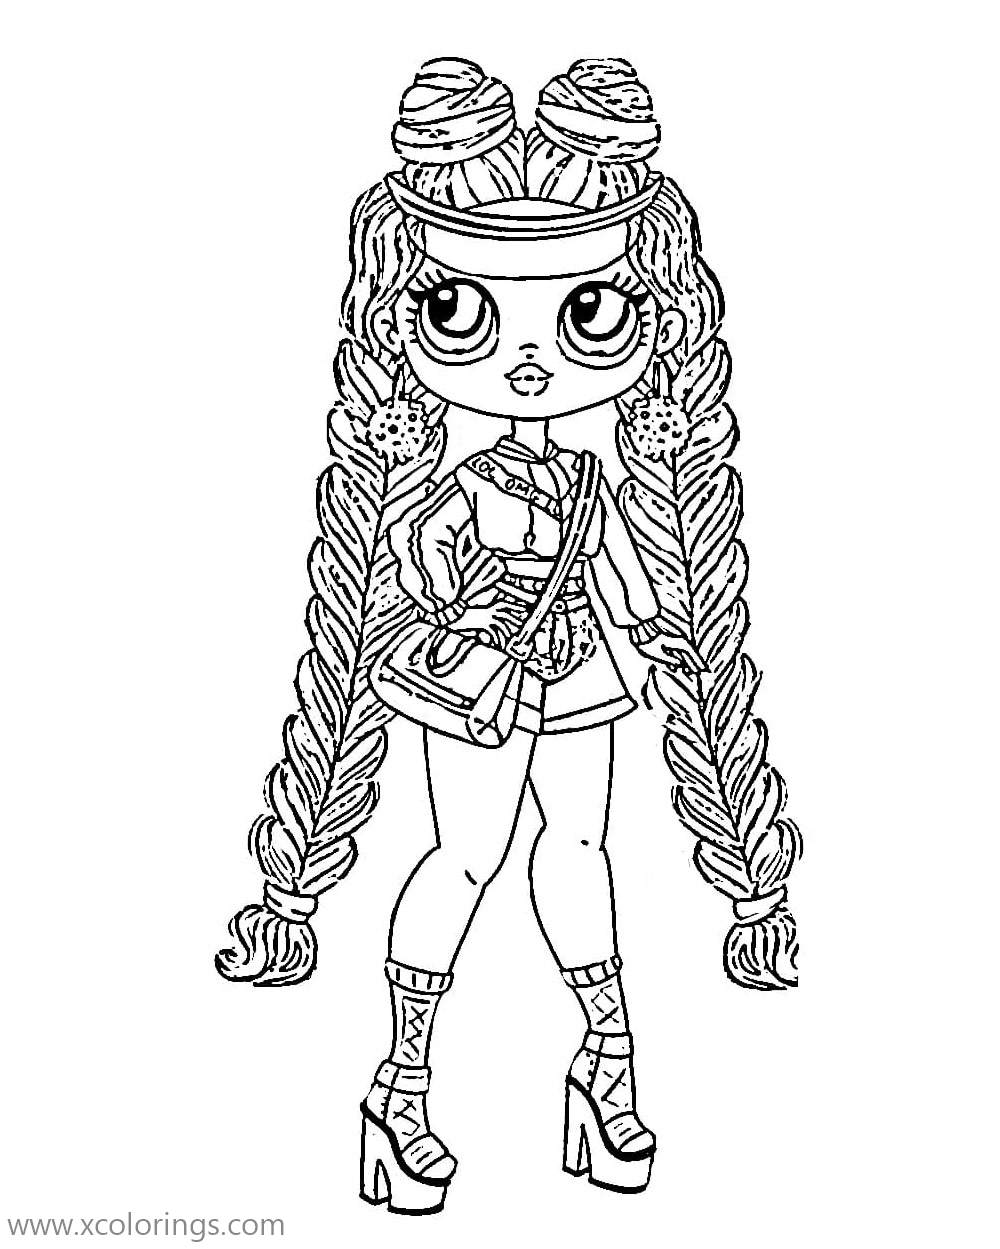 Older sister from LOL OMG Doll Coloring Pages